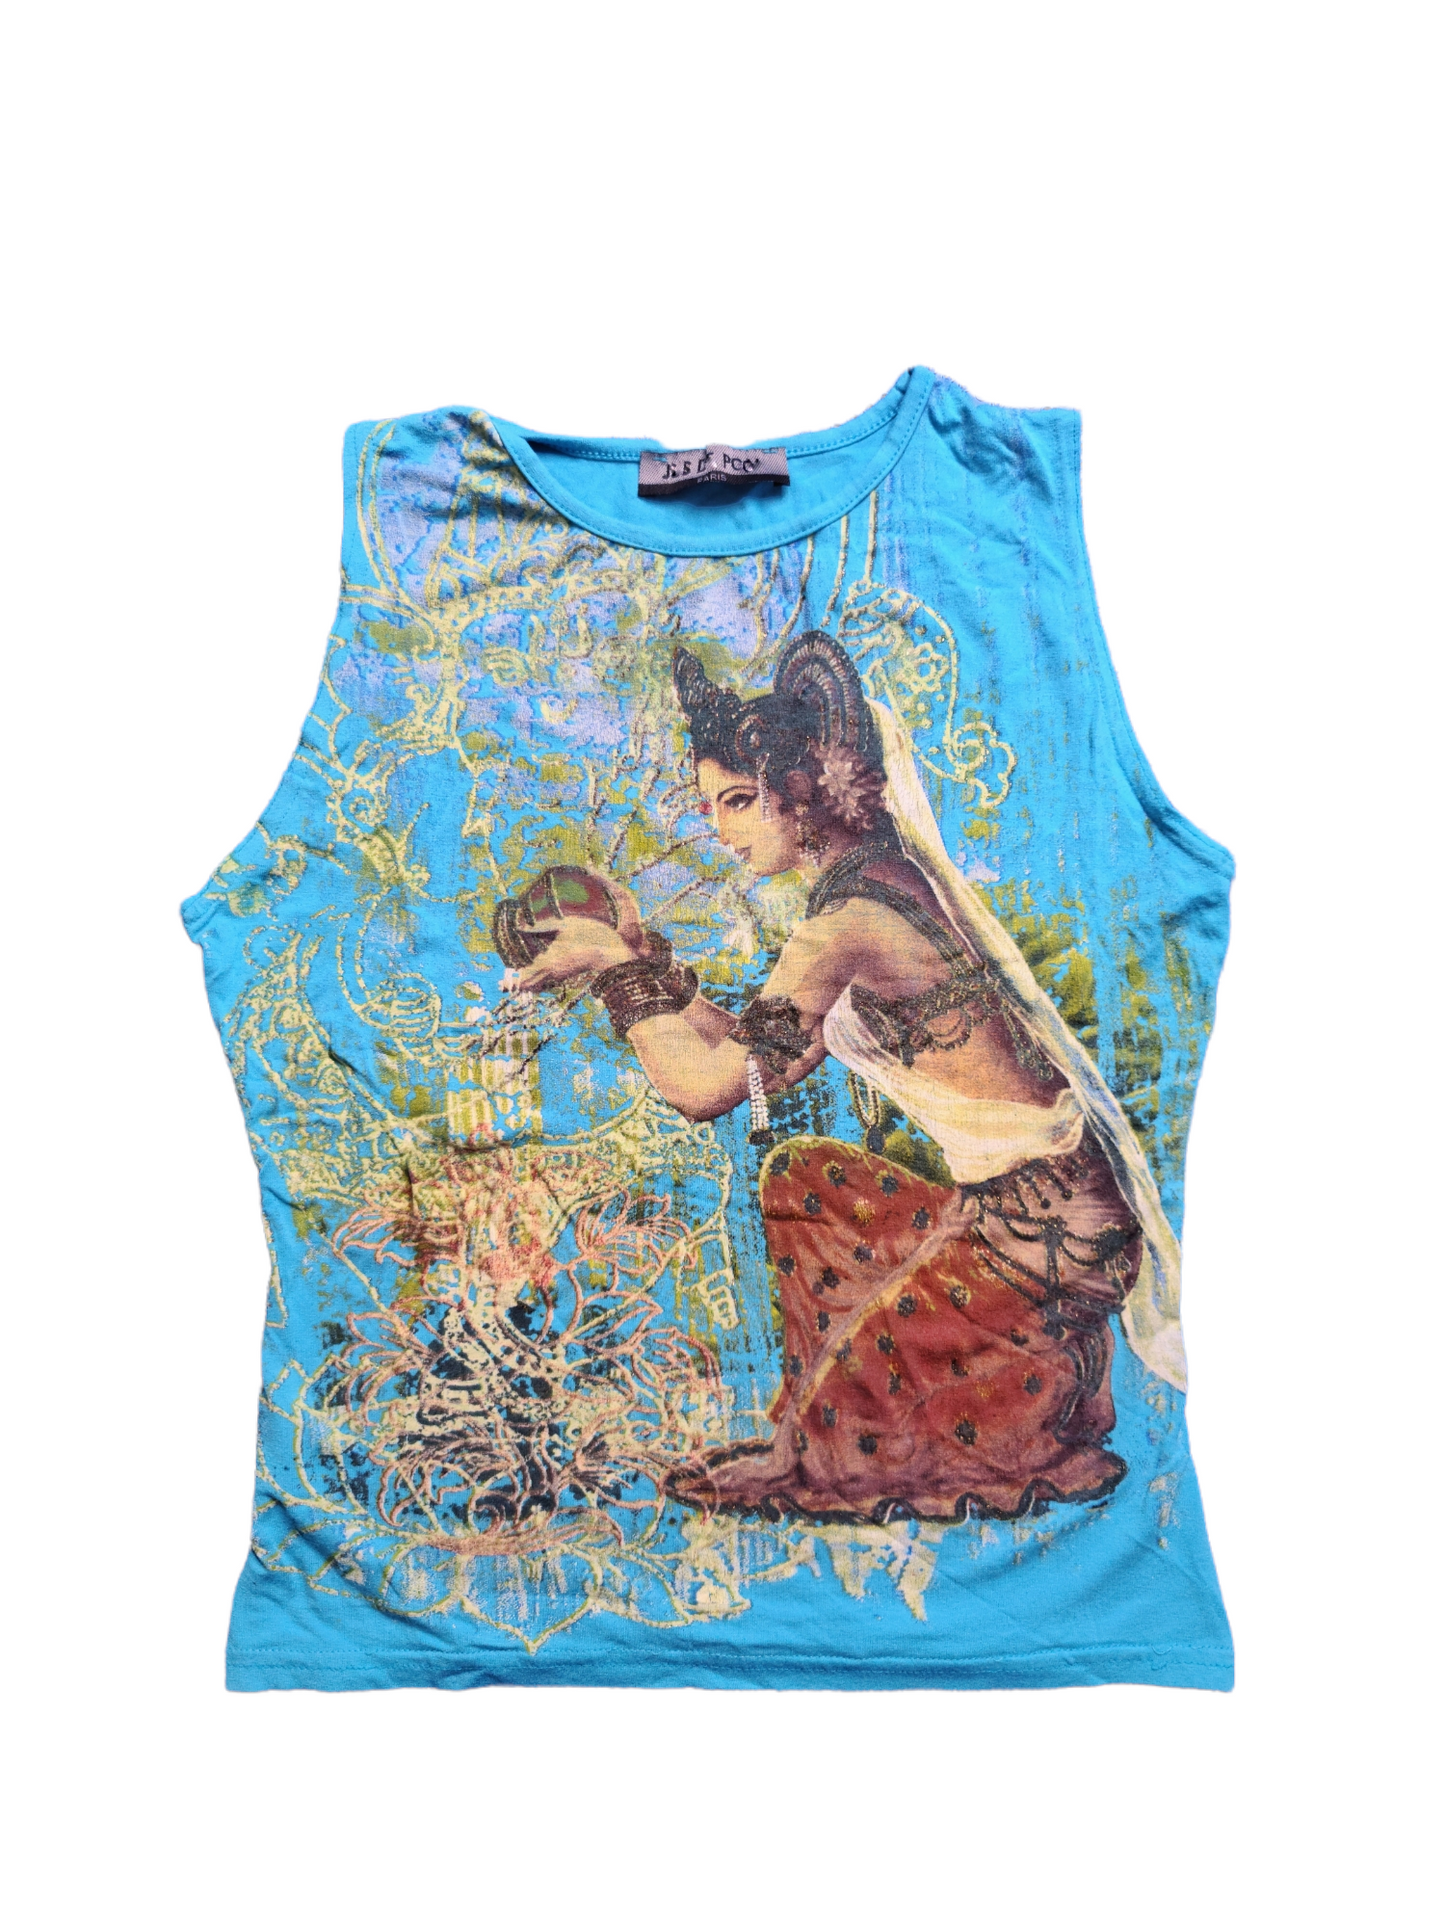 Tank top vintage cybery2k 90s printed 90s inde rave weird colorful archive fashion